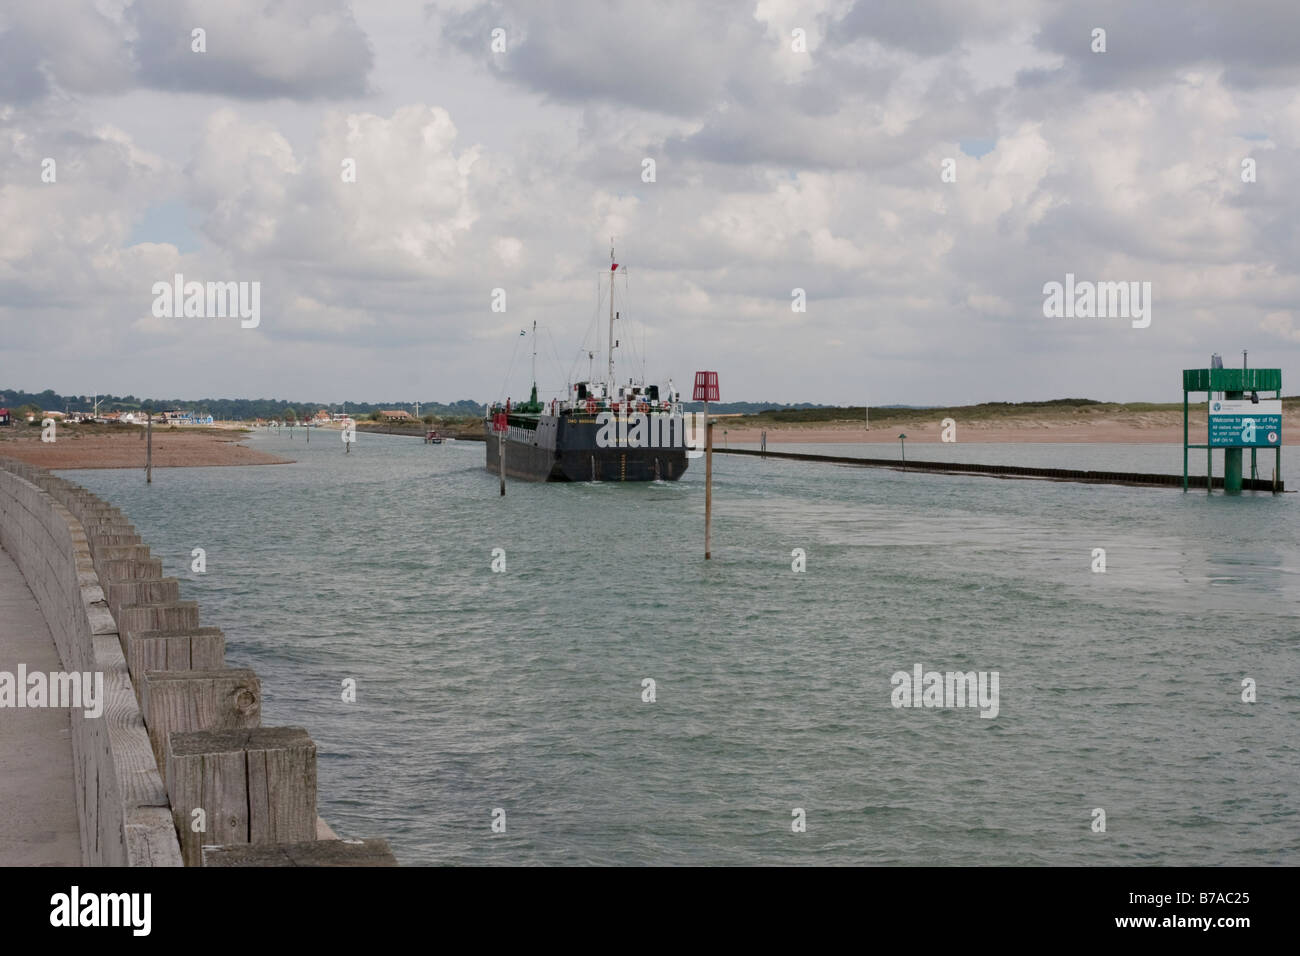 The Redwing entering Rye Harbour, East Sussex, England. Stock Photo